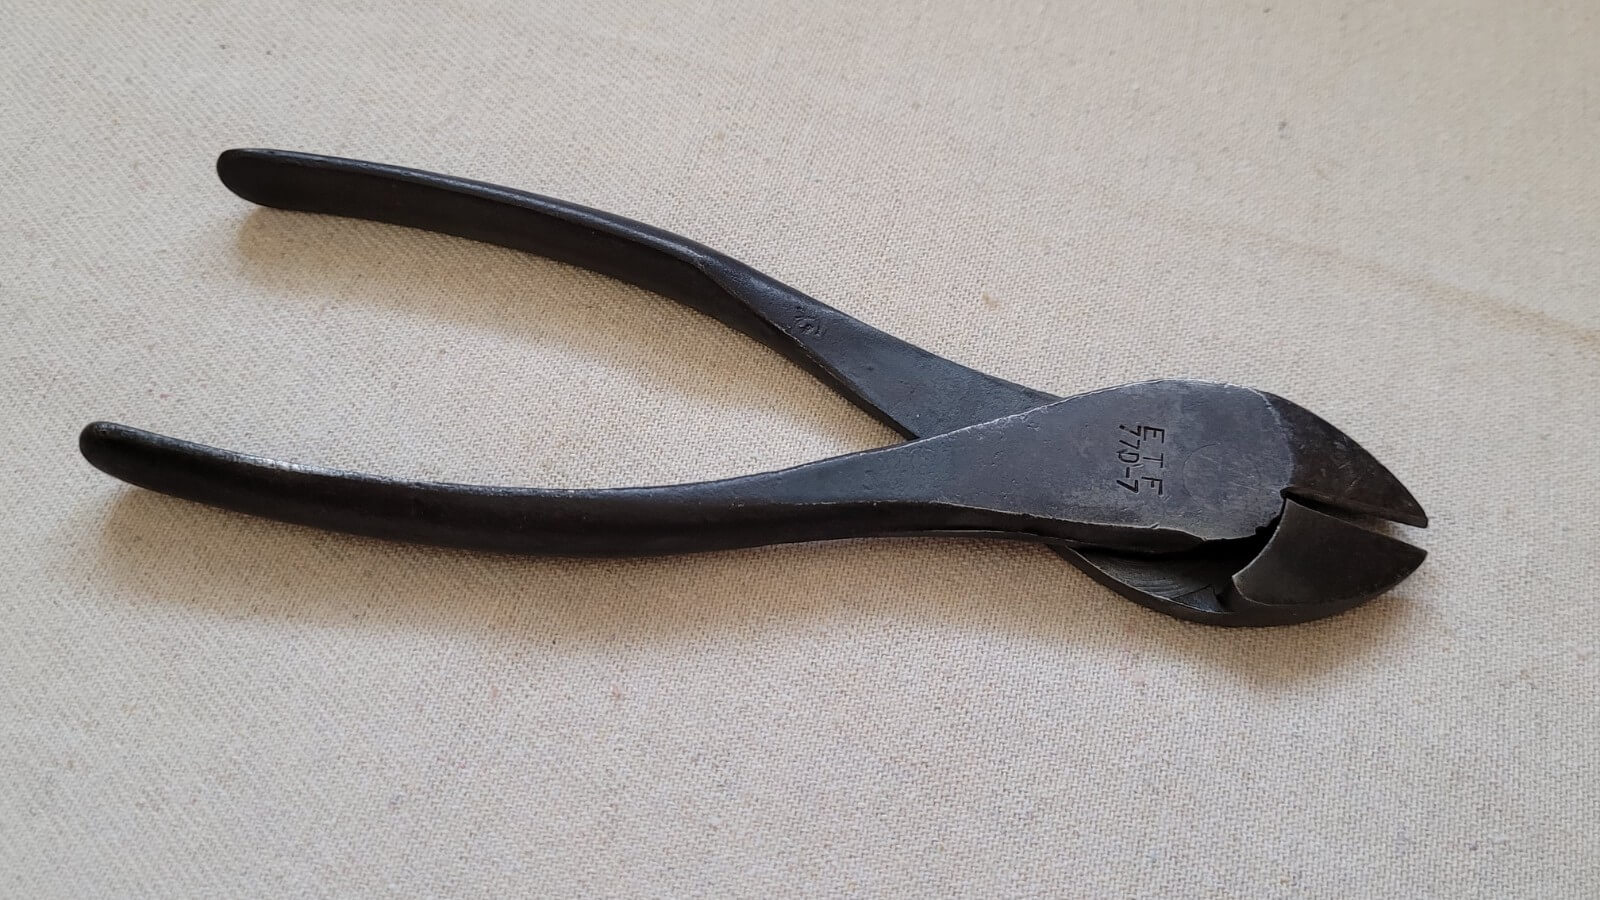 Rare ETF Engineering Tool & Forging 7 Inch Cutting Pliers made in Canada - Vintage Fine Tools